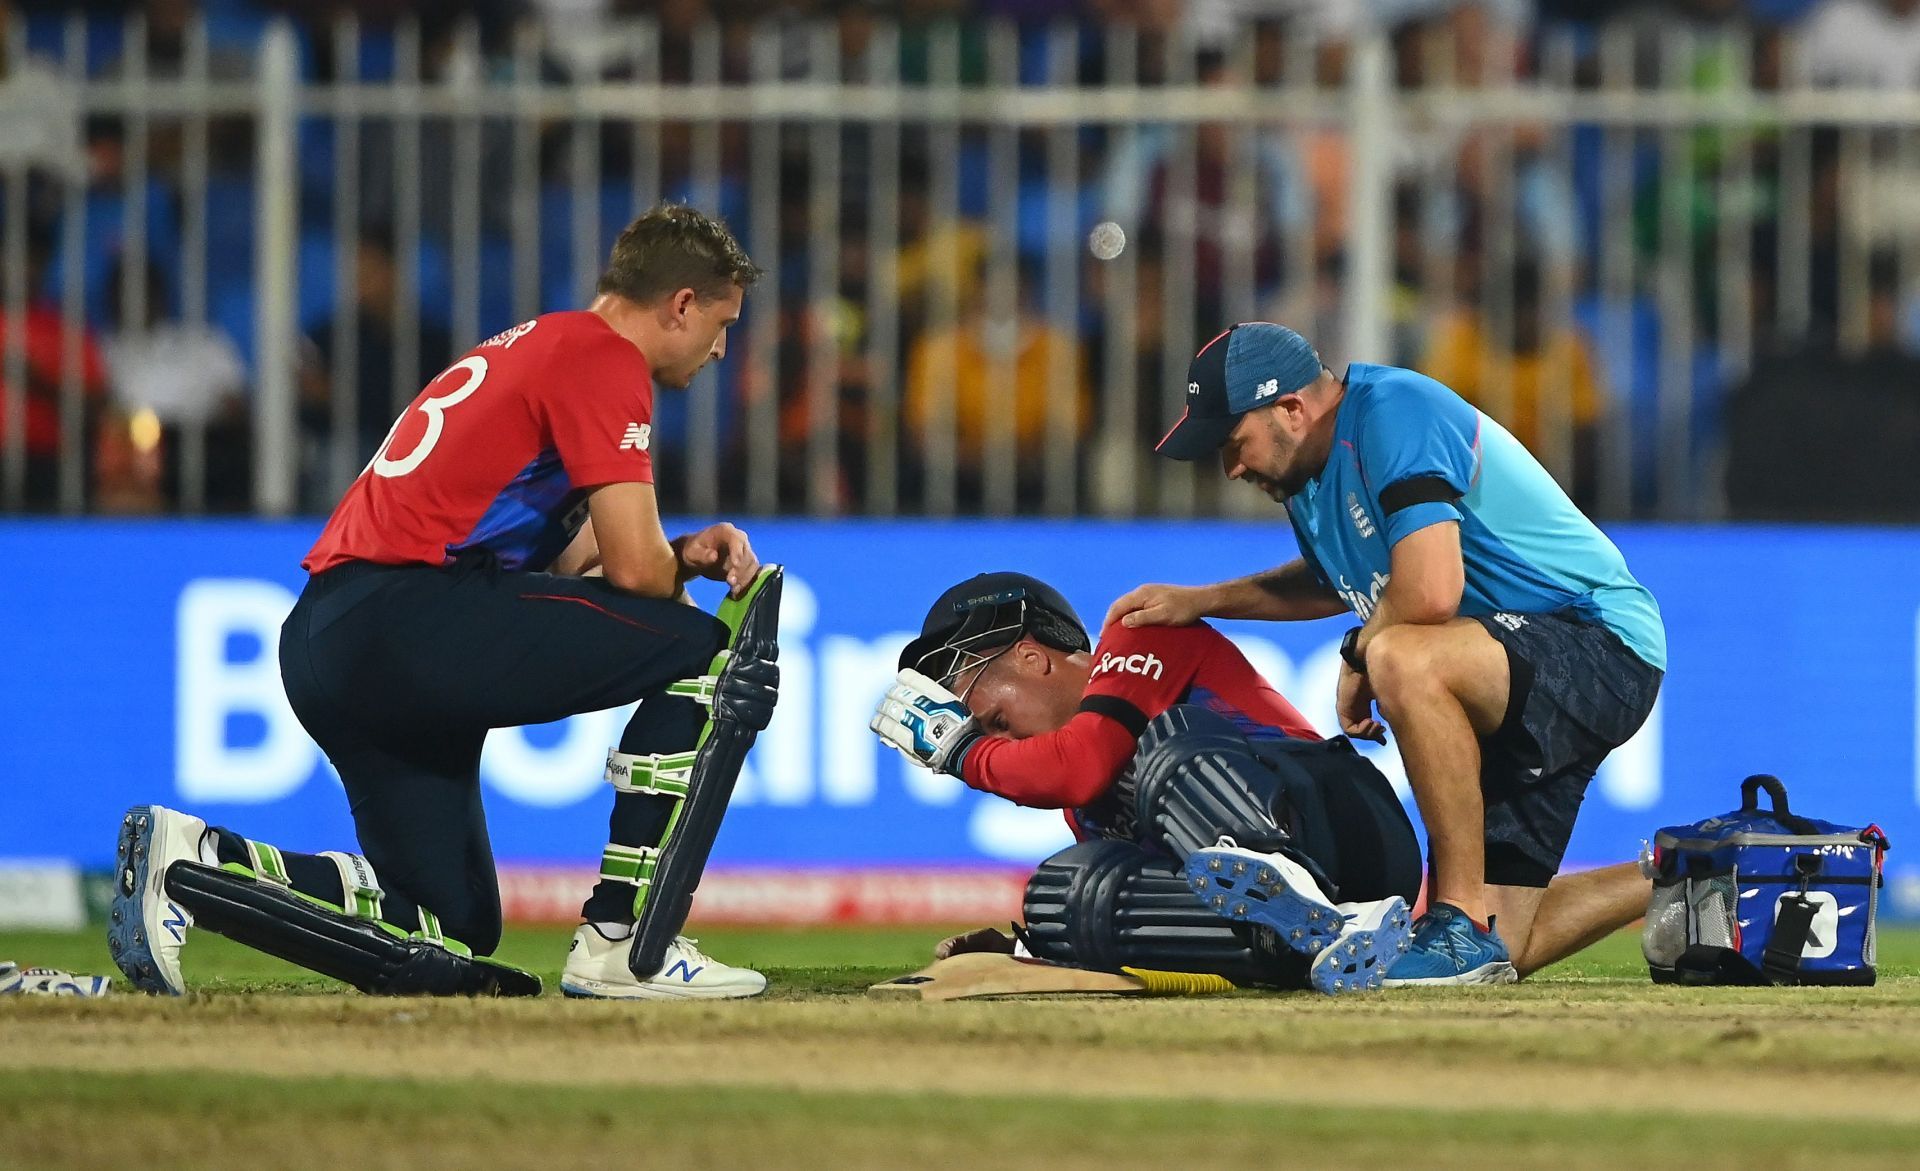 Jason Roy receives medical attention during the match between England and South Africa. Pic: Getty Images